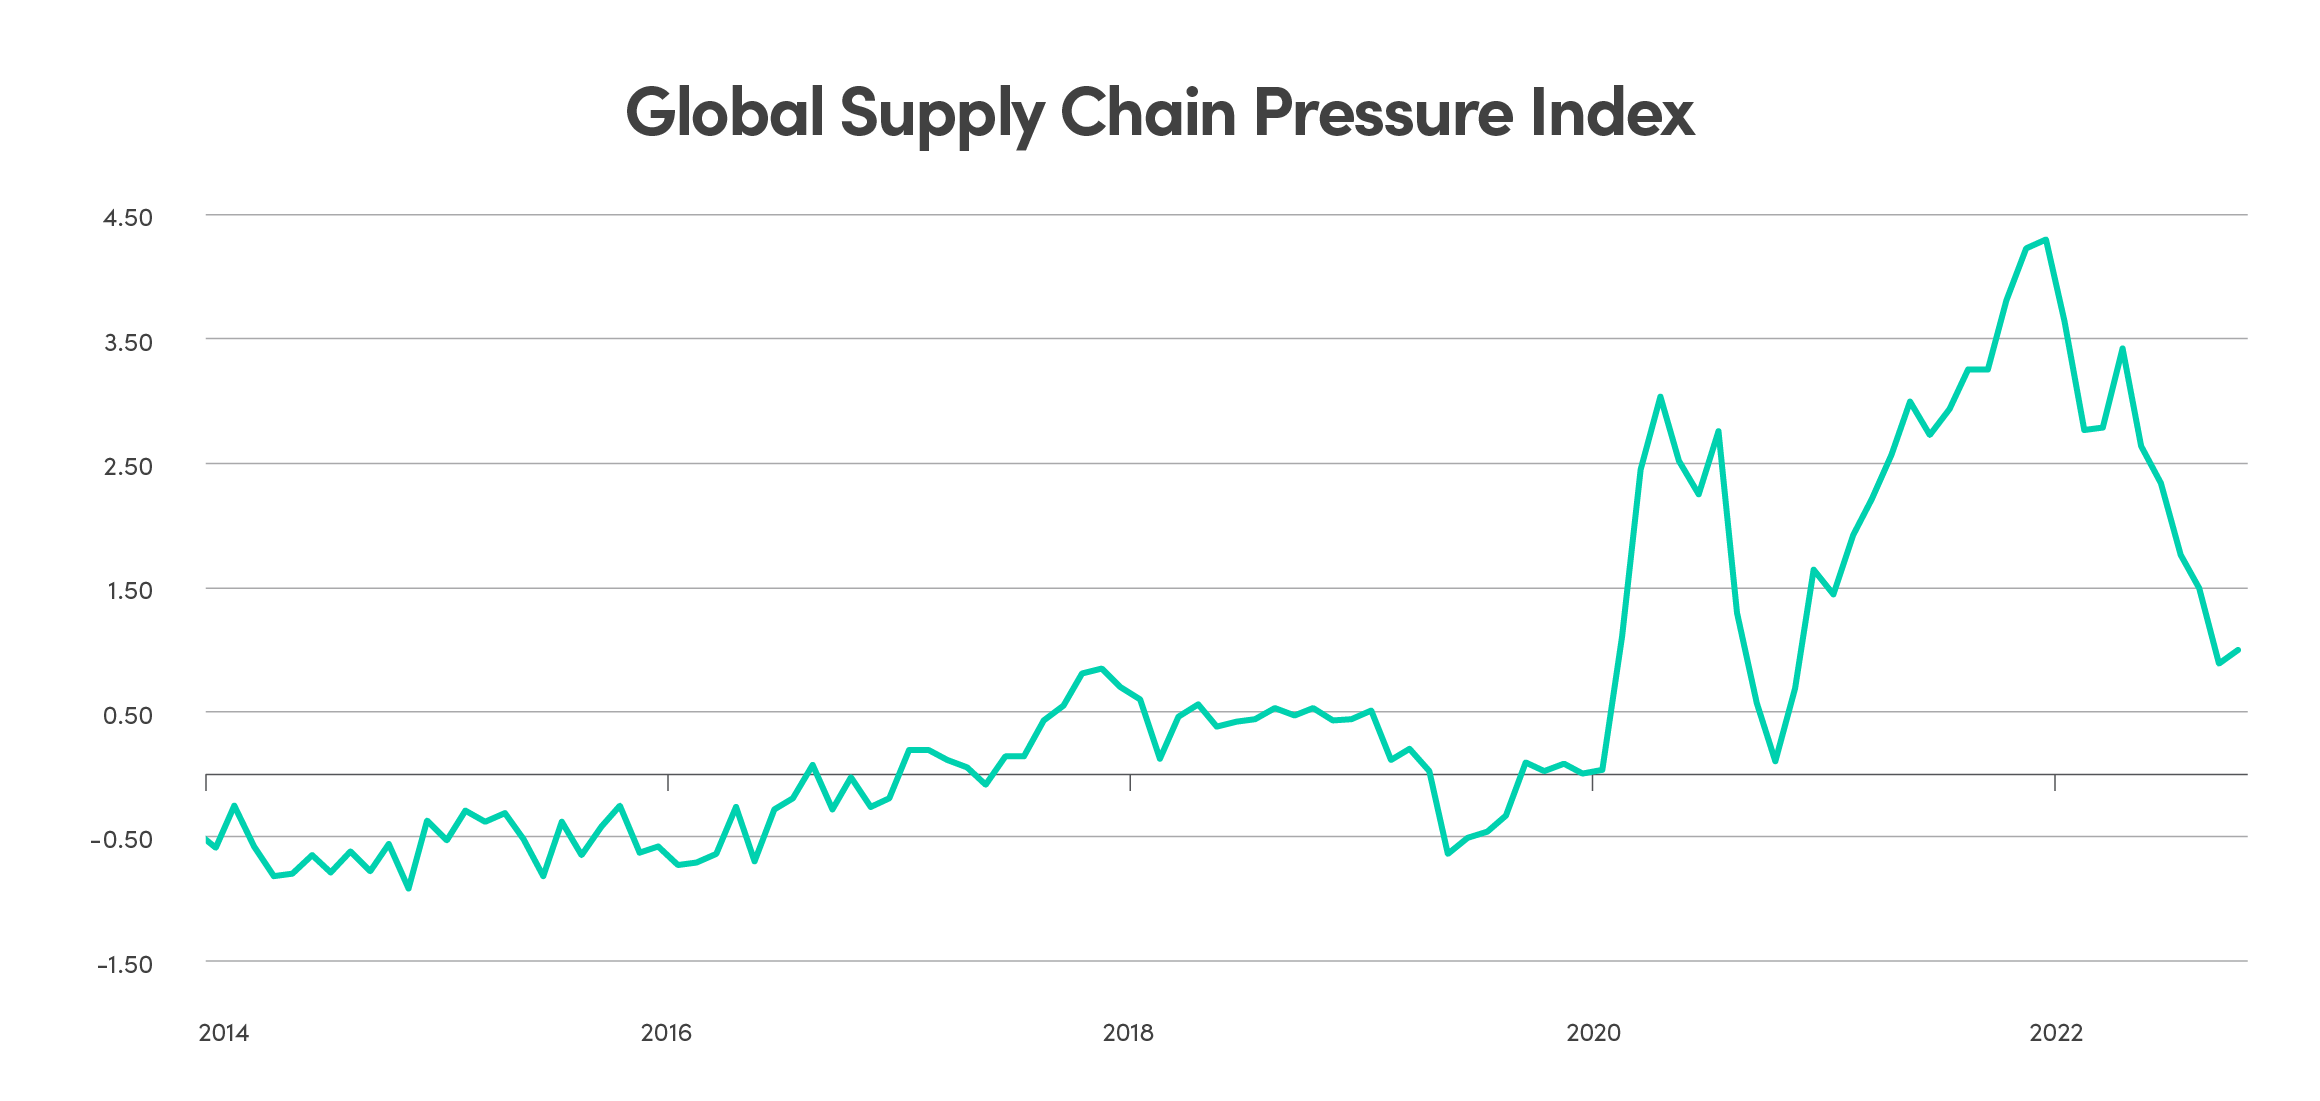 Graph showing the global Supply Chain Pressure Index from 2014 to 2022